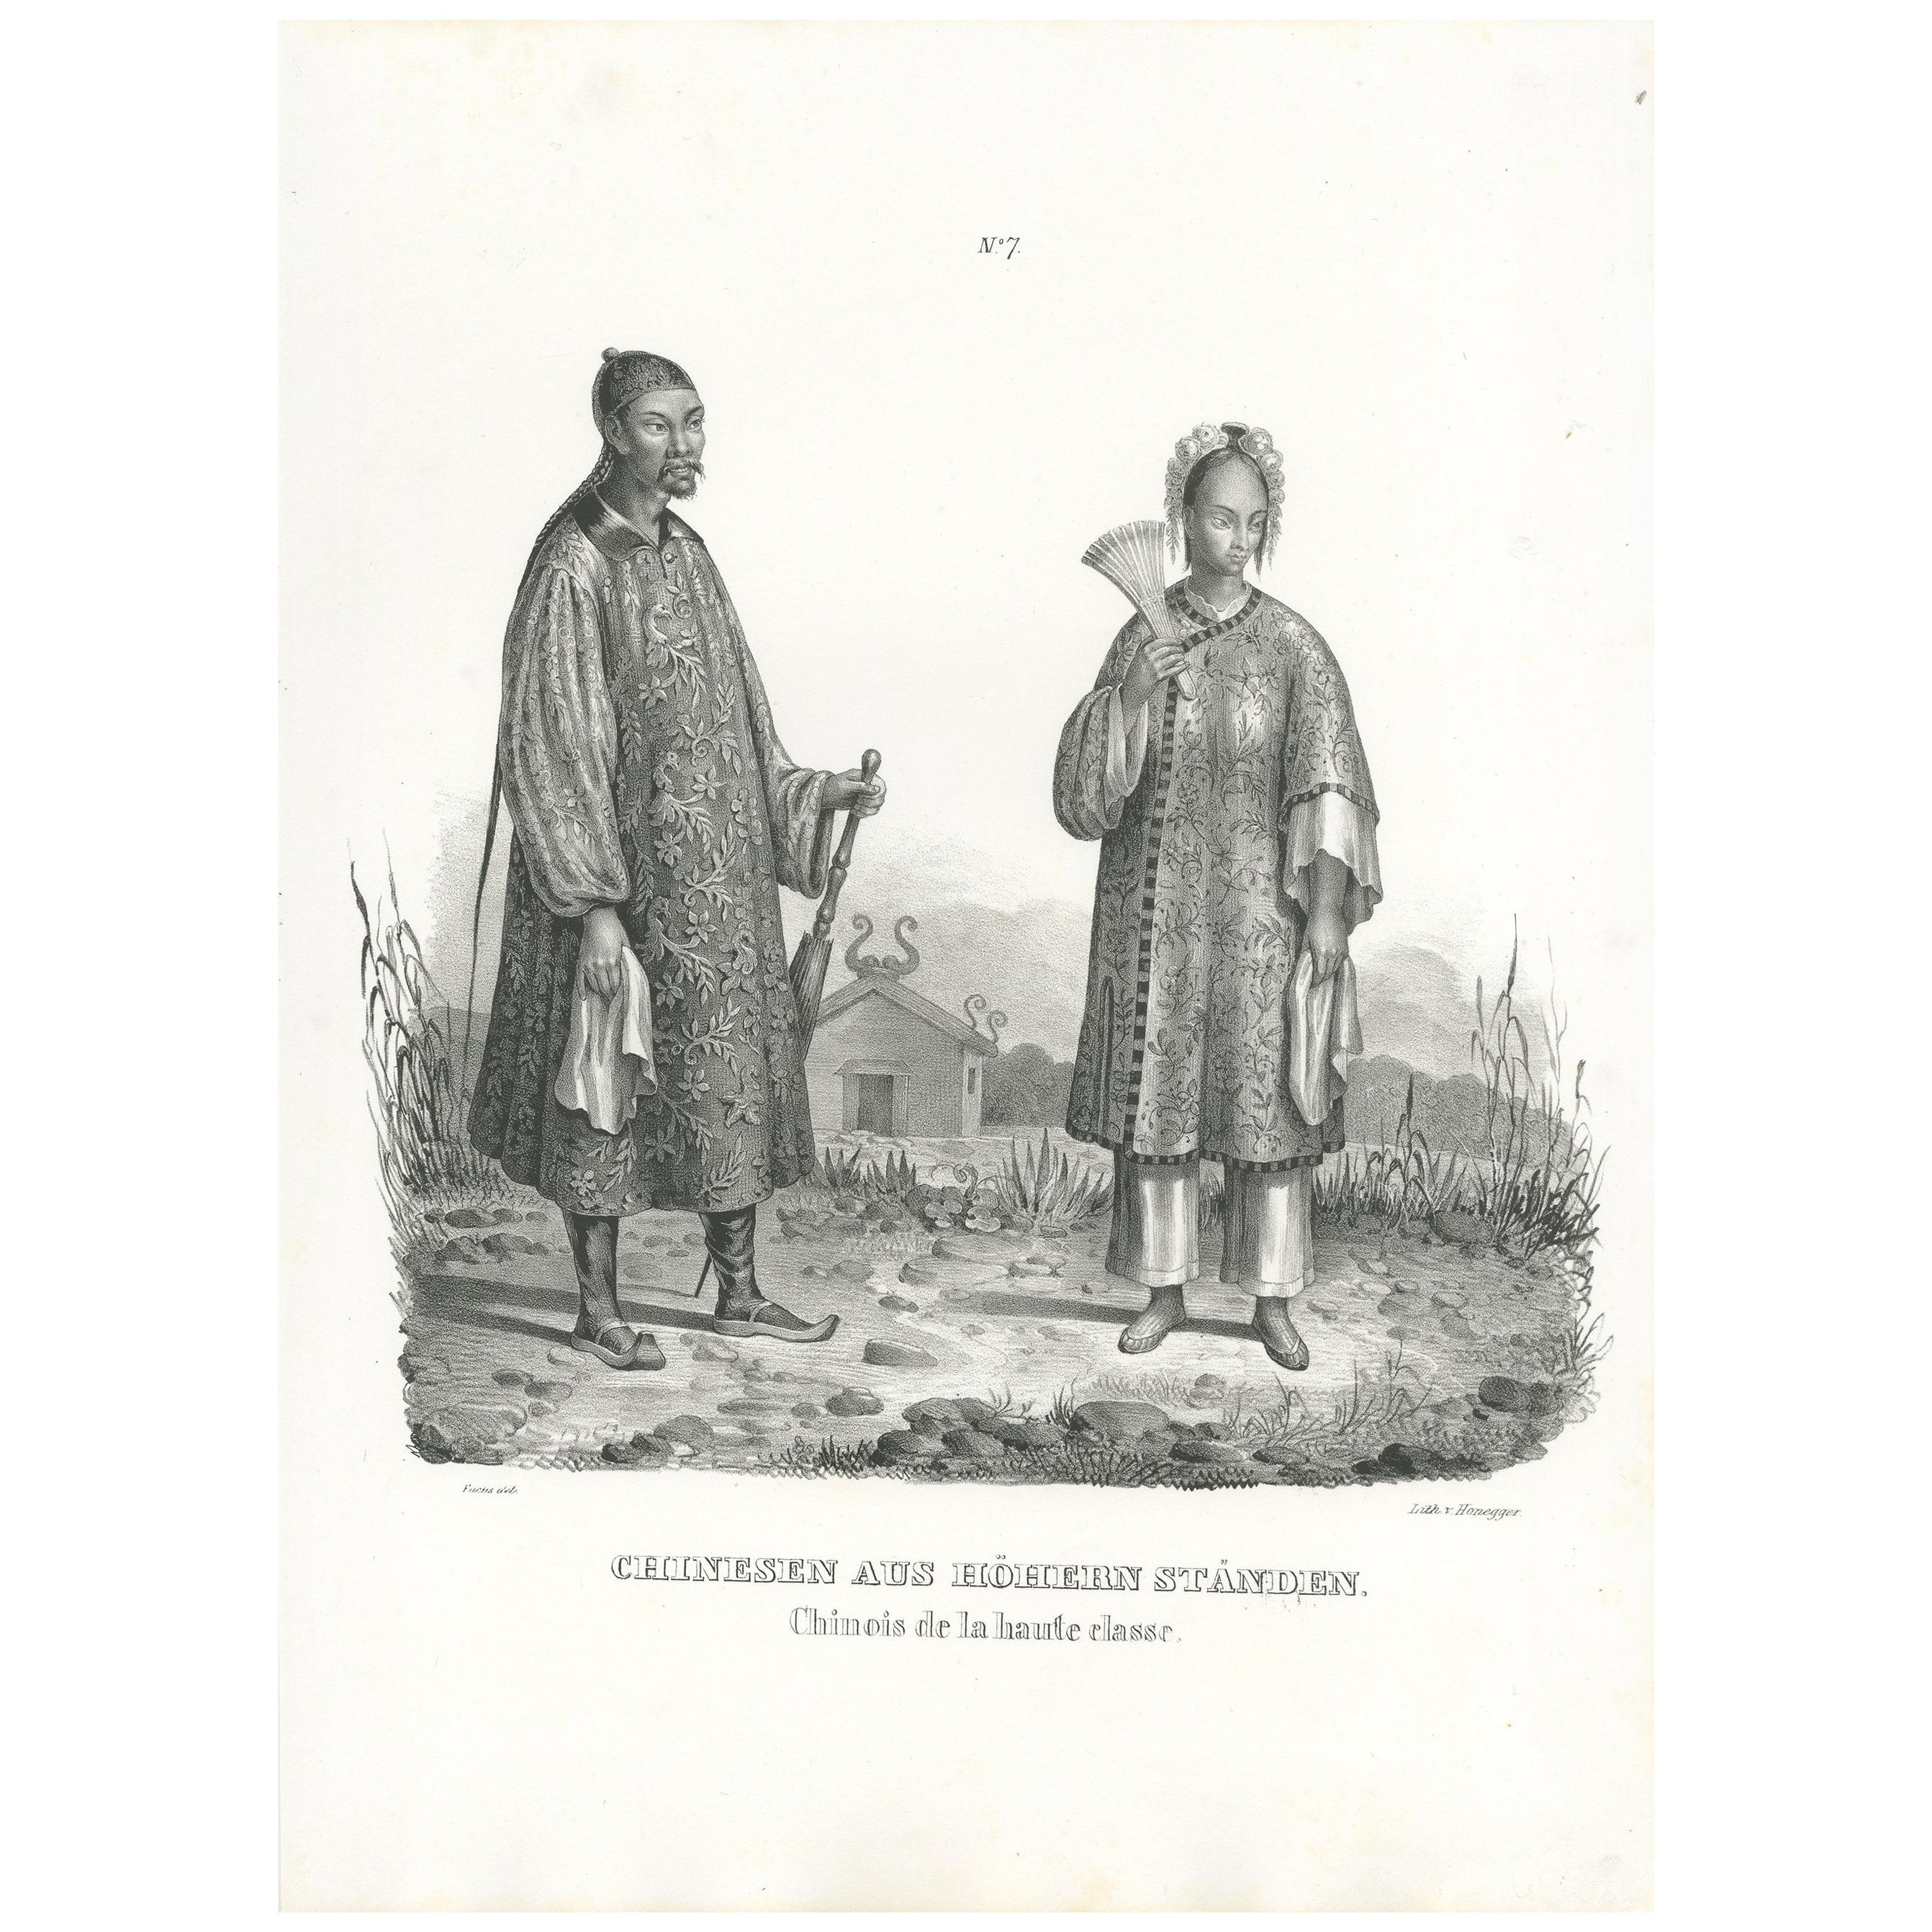 Antique Print of a Chinese Nobleman and Noblewoman by Honegger, 1845